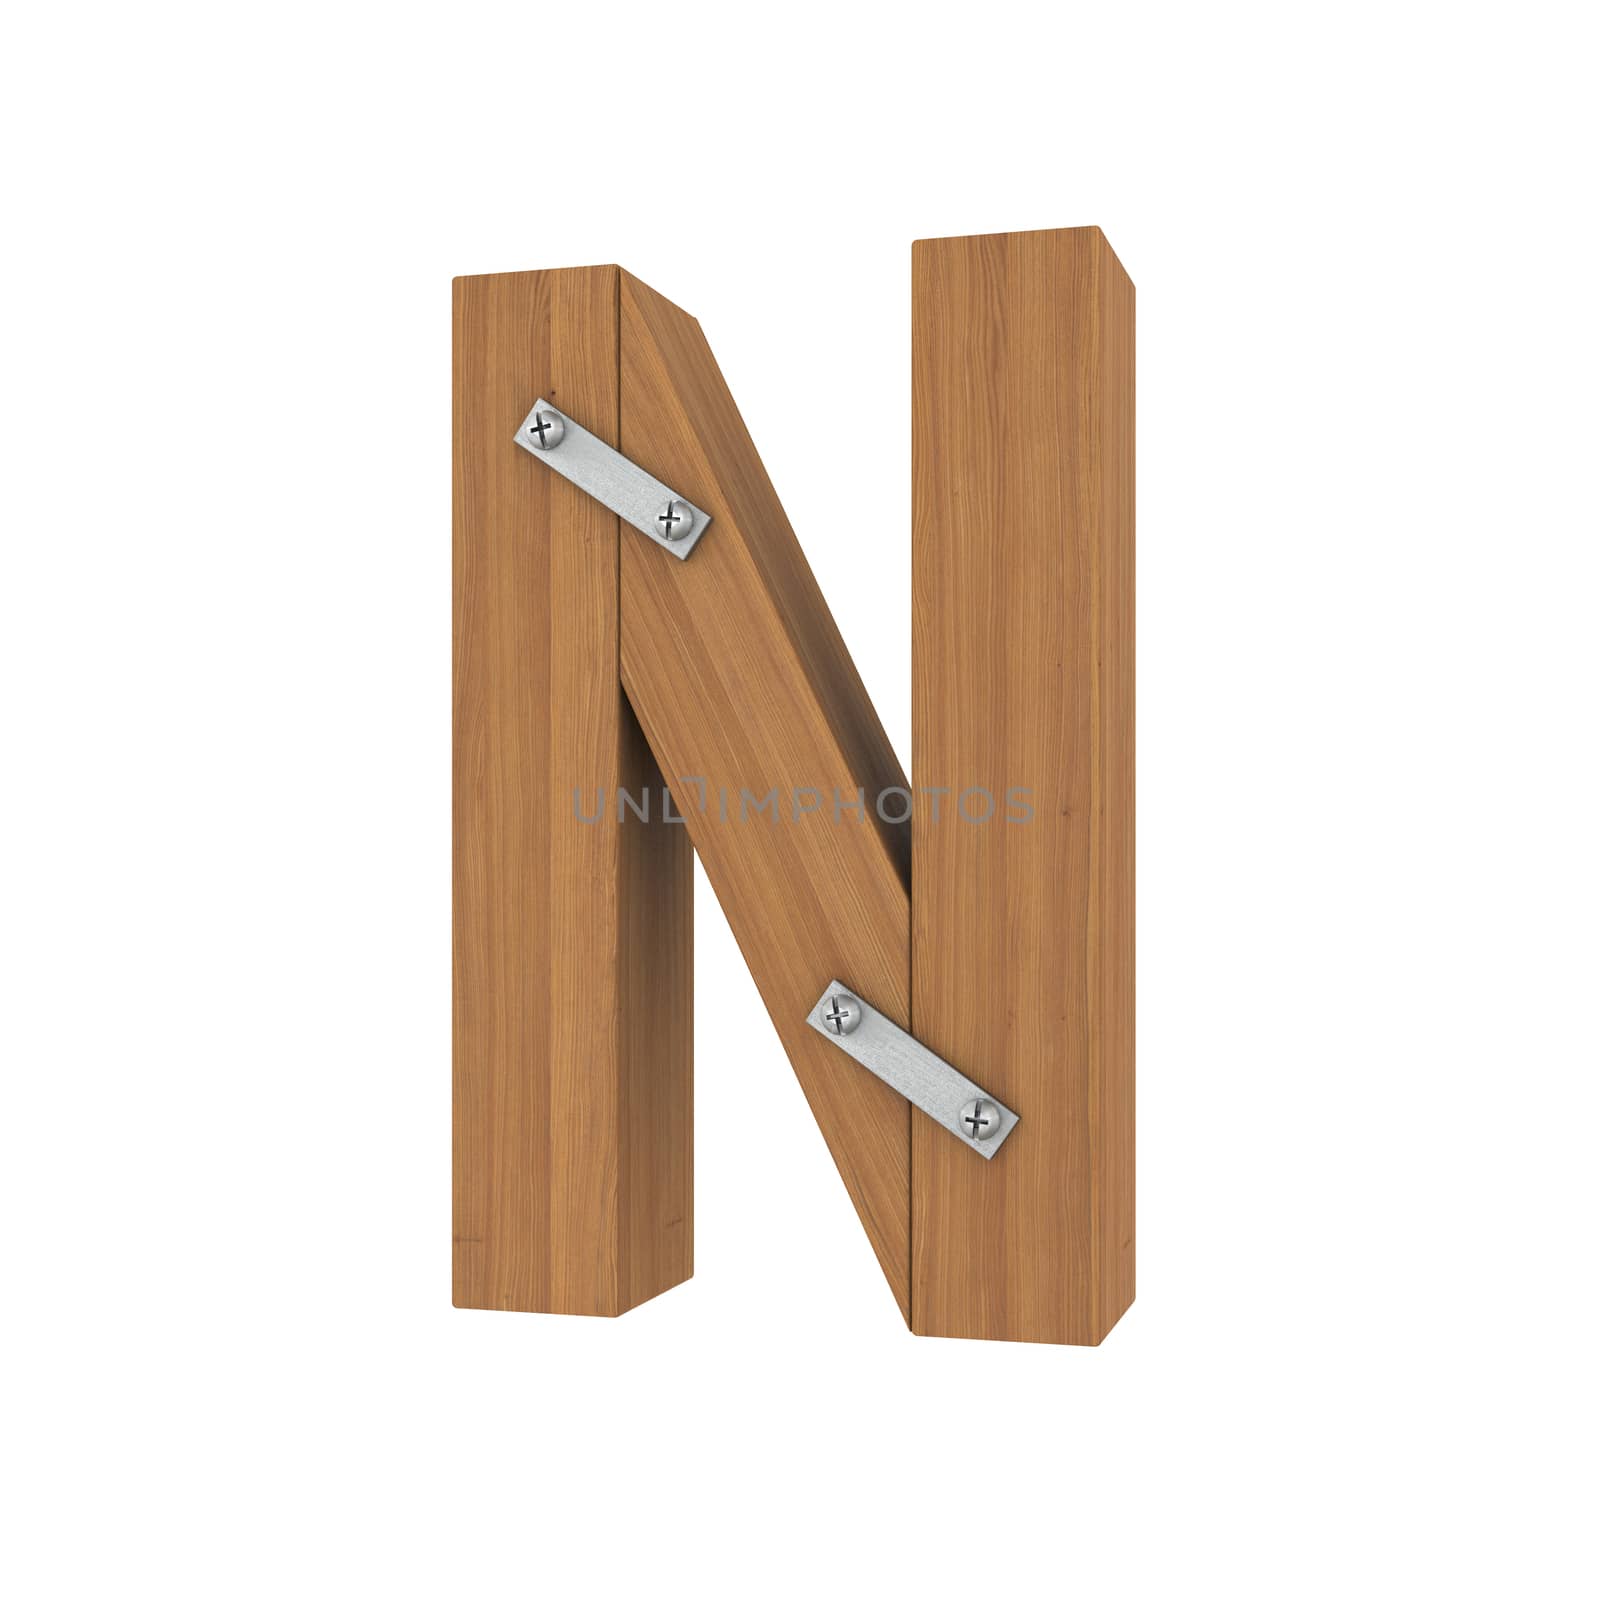 Wooden letter N. Isolated render on a white background